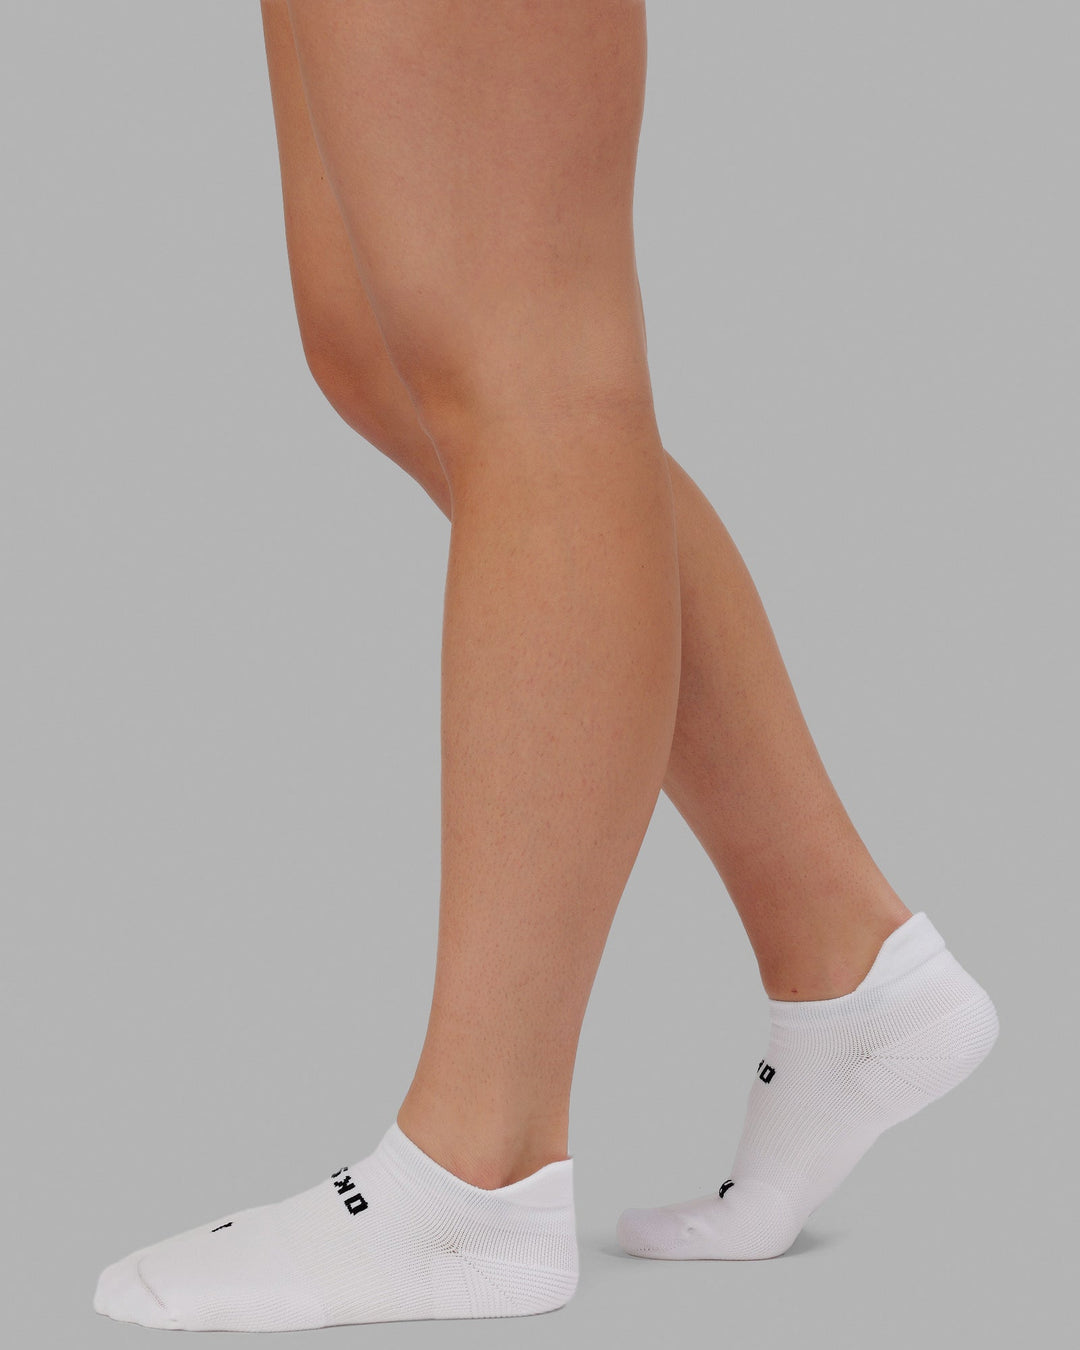 Rep Performance Ankle Sock - White